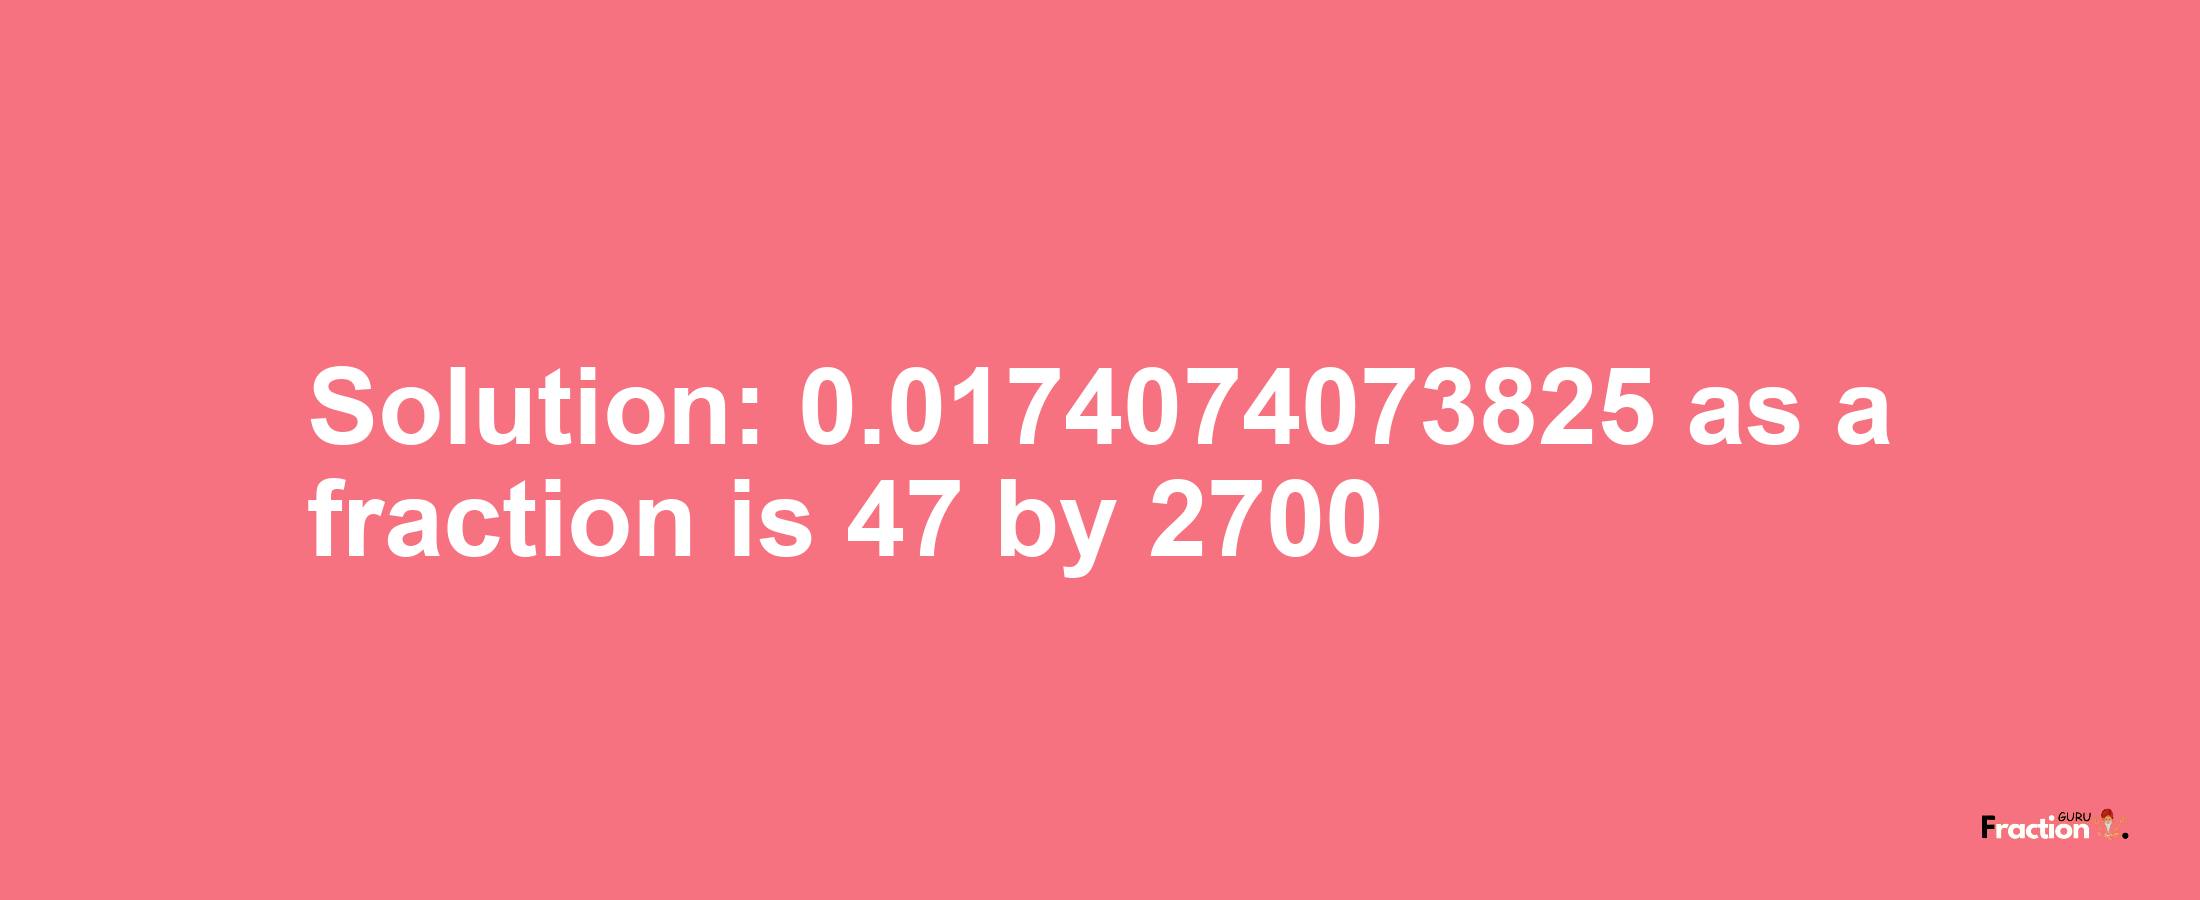 Solution:0.0174074073825 as a fraction is 47/2700